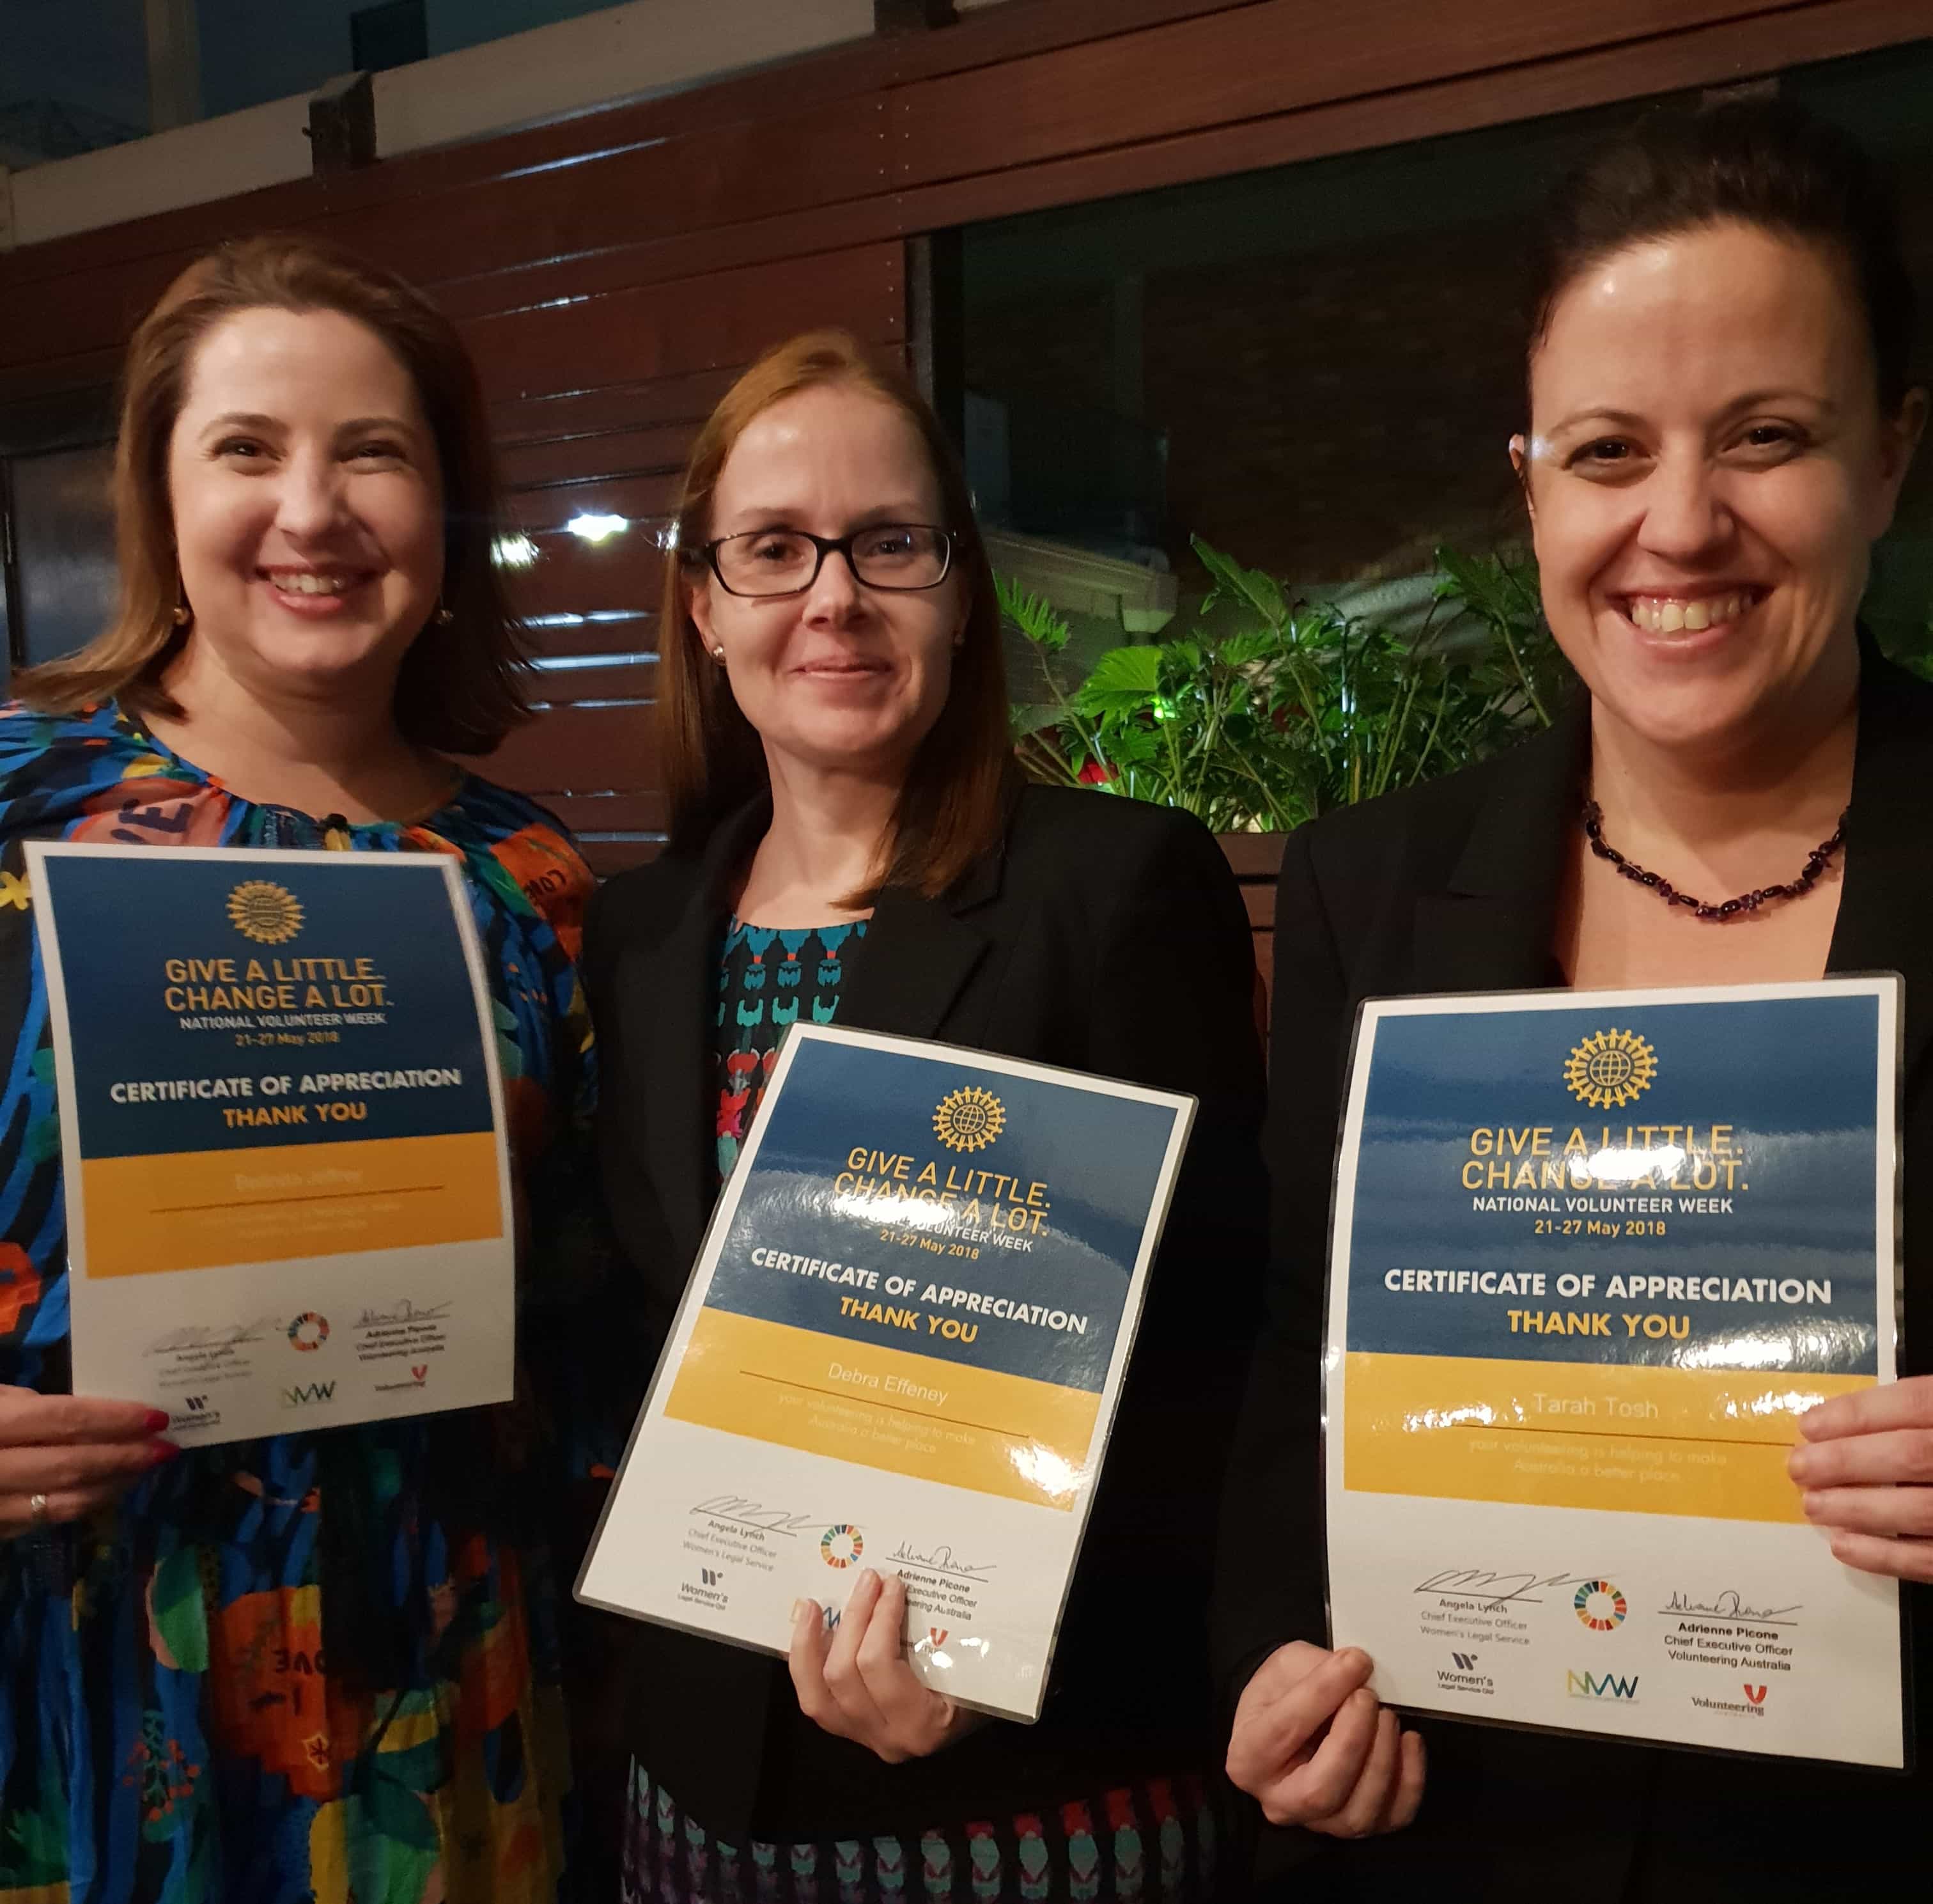 A photo of Belinda, Debra and Tarah with certificates 'Give a little change a lot"